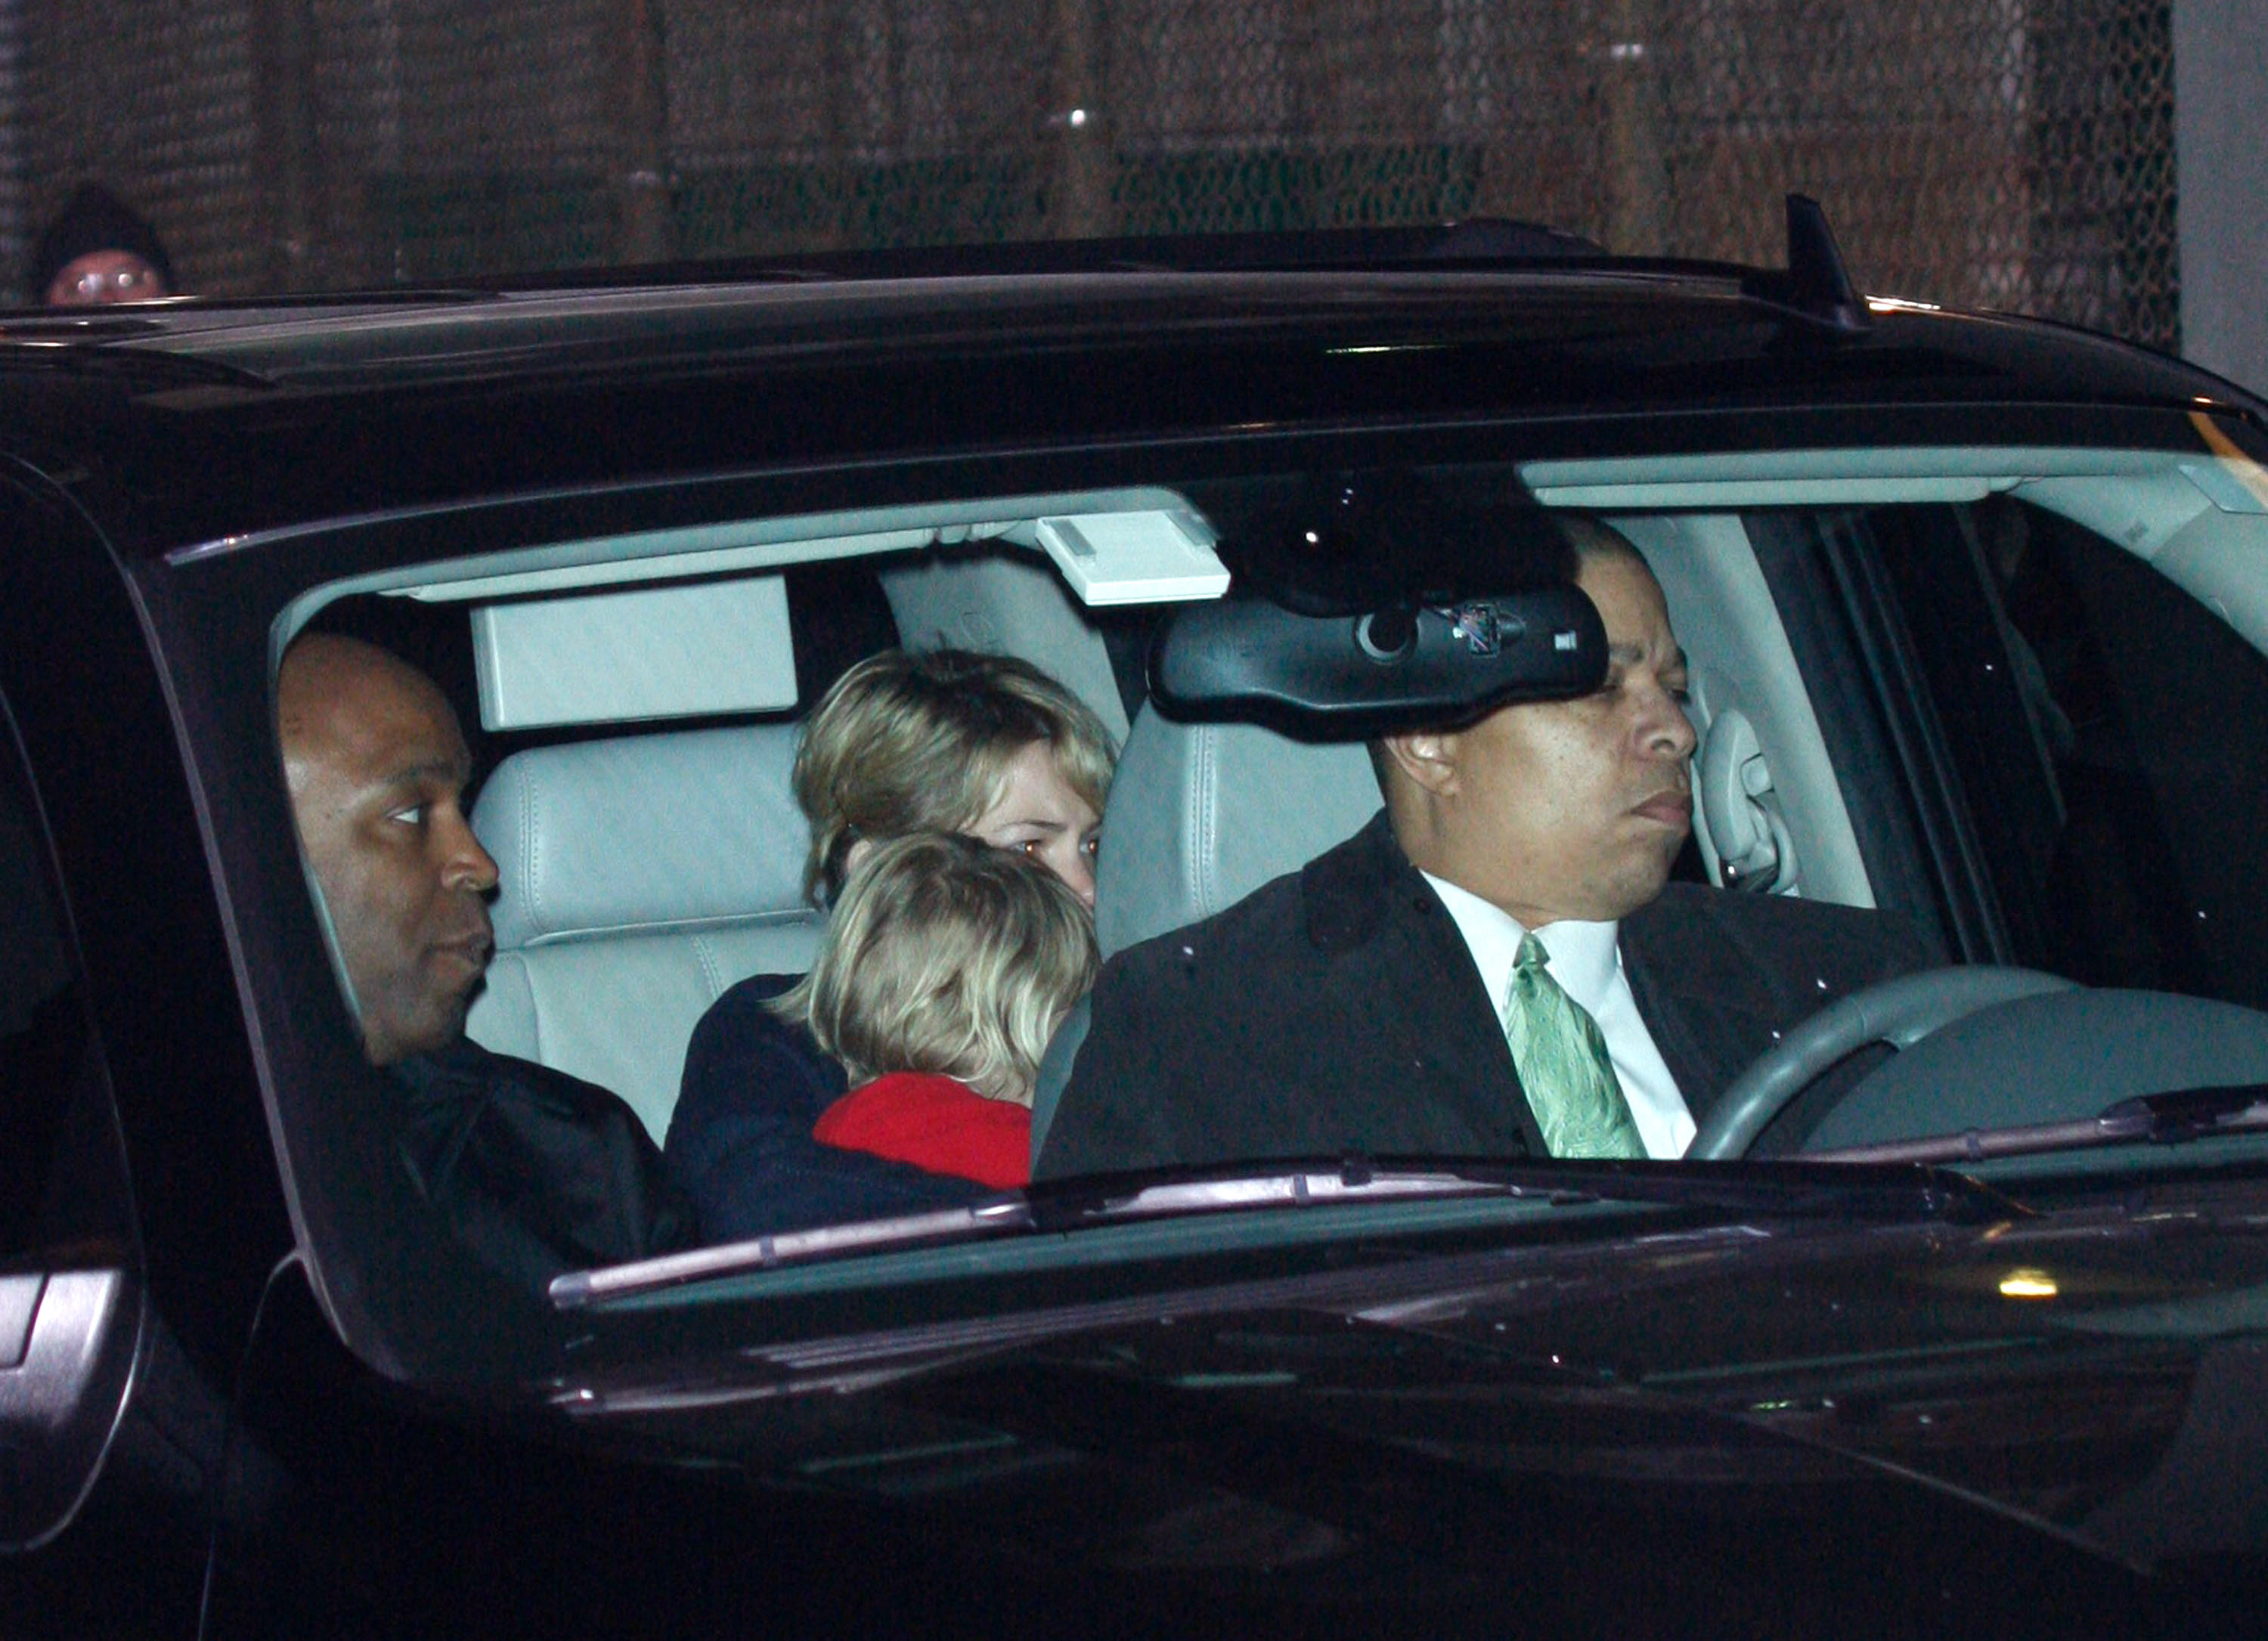 Michelle Williams and Matilda Ledger spotted in a car in Brooklyn, New York on January 23, 2008 | Source: Getty Images